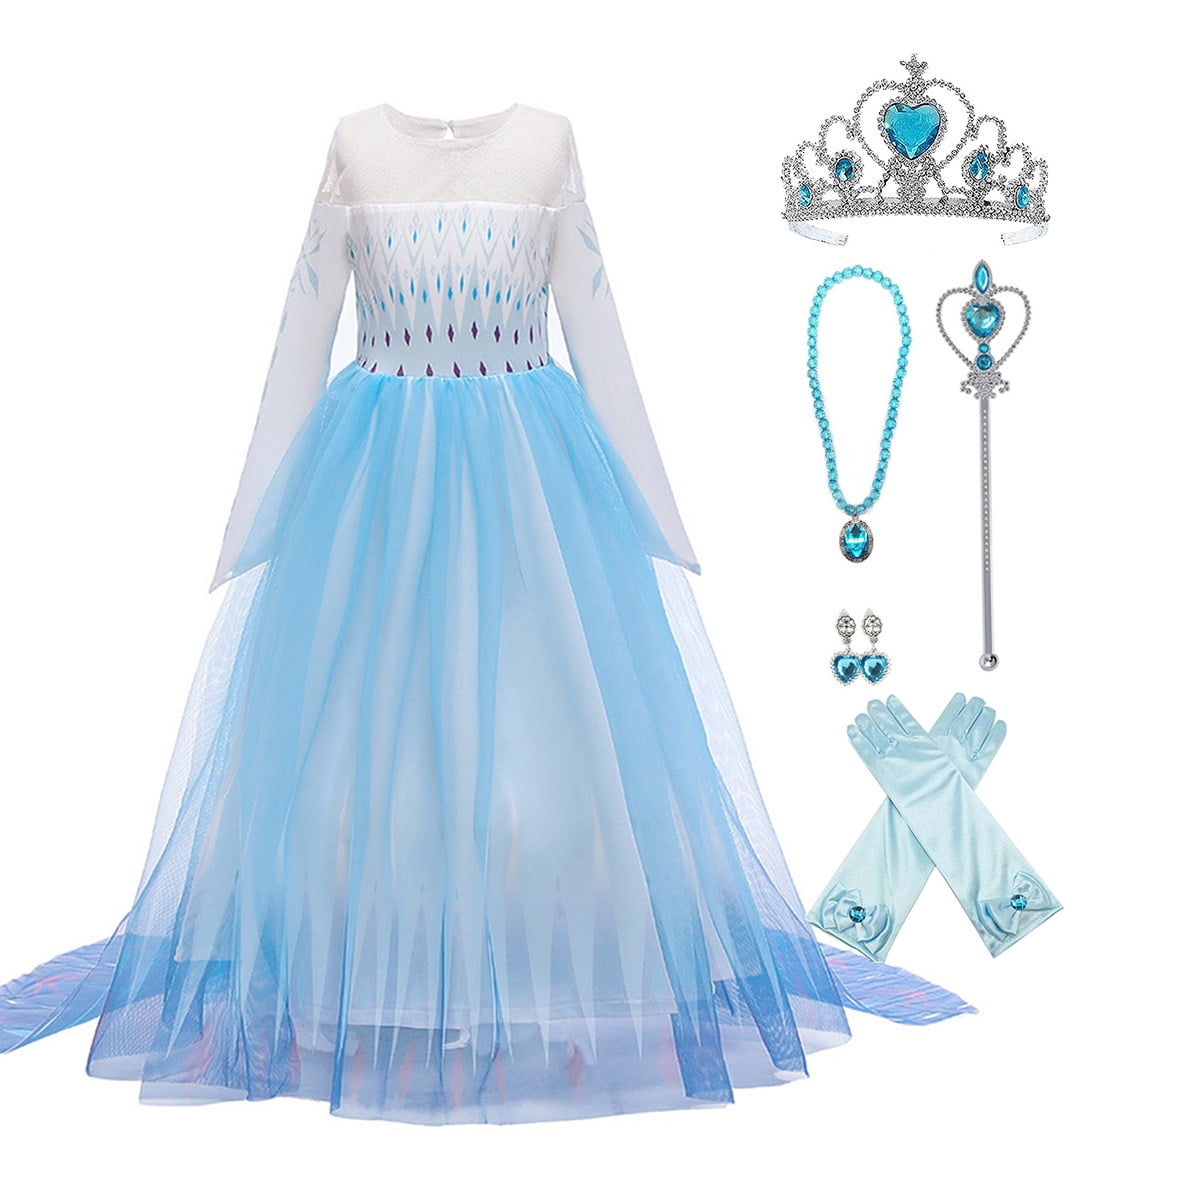 Elsa Act 2 Halloween Costume for Girls, Frozen 2, Includes Dress and Accessories